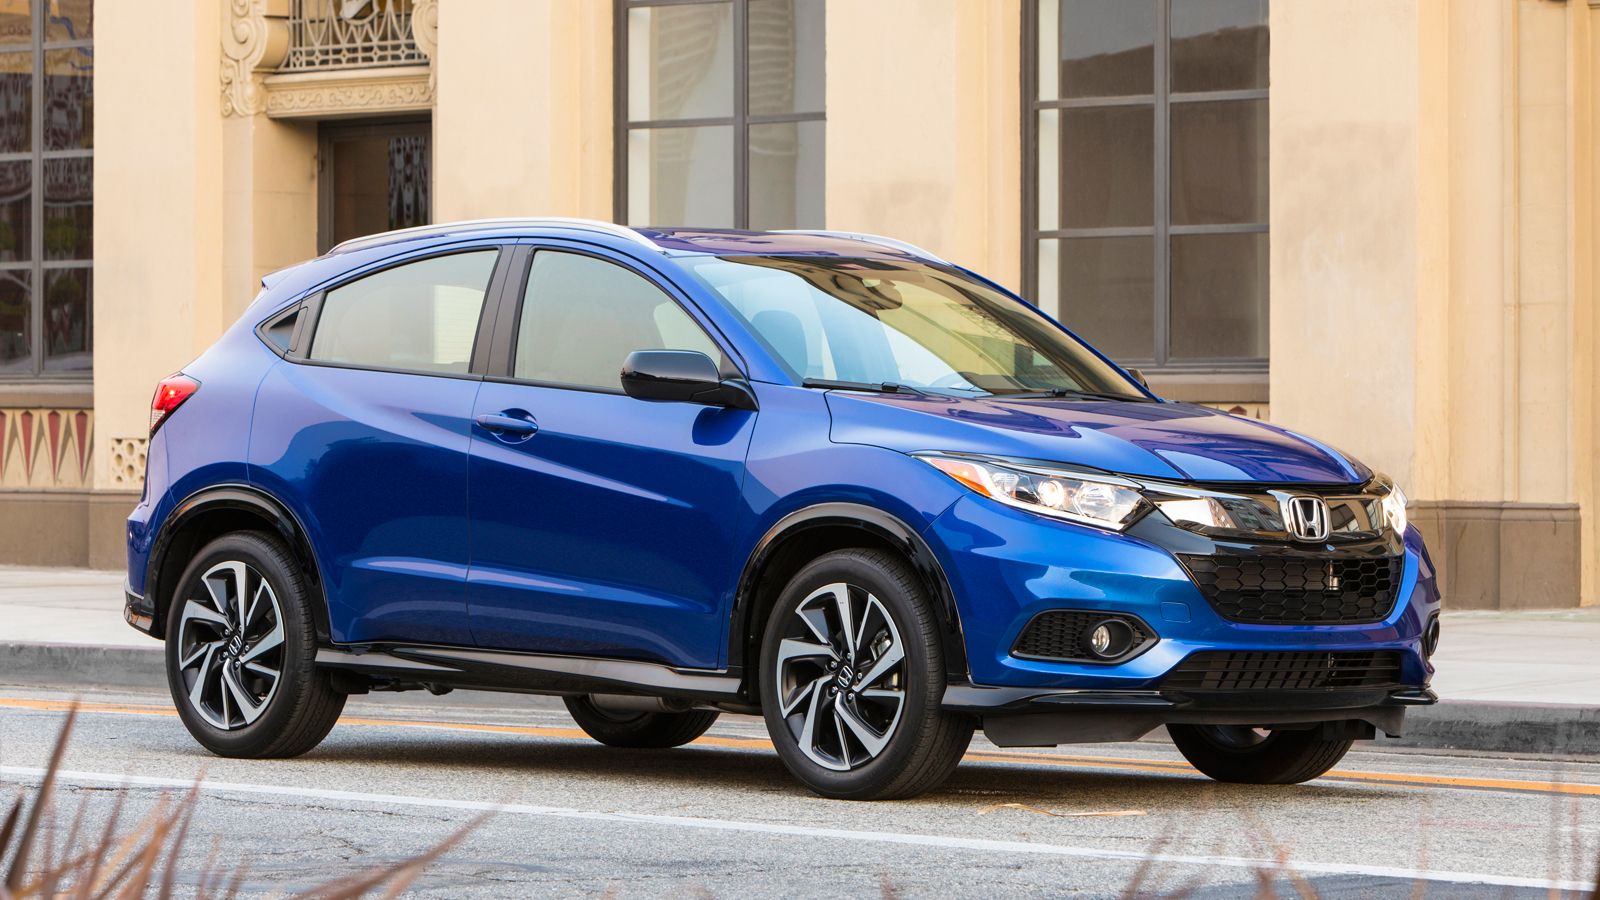 2019 Honda HR-V Touring road test: Everything you need to know